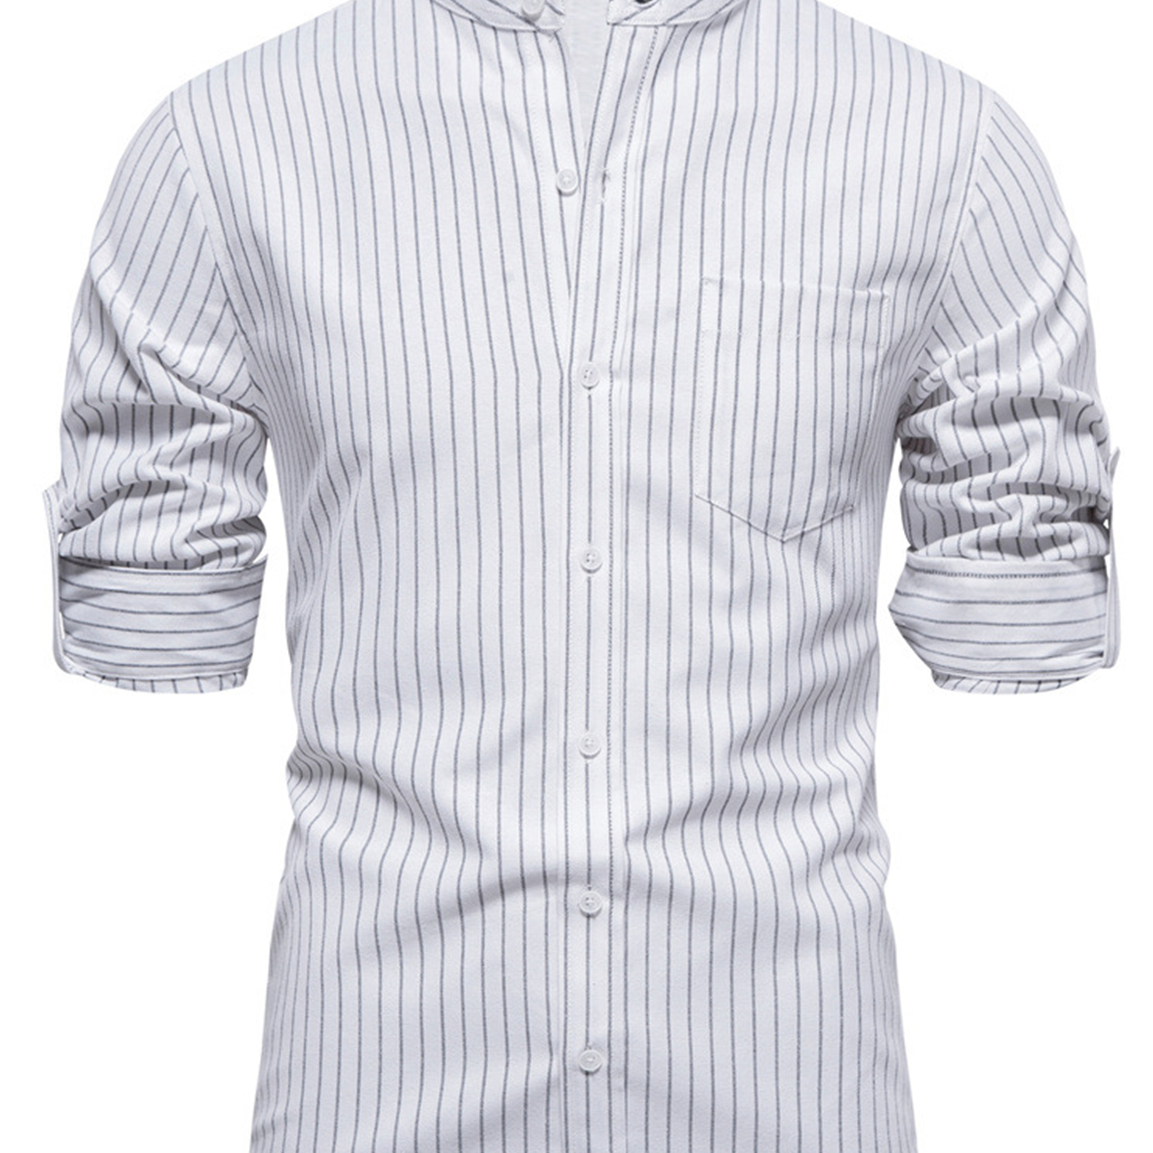 Men's Casual Striped Pocket Henry Collar Button Up Long Sleeve Shirt